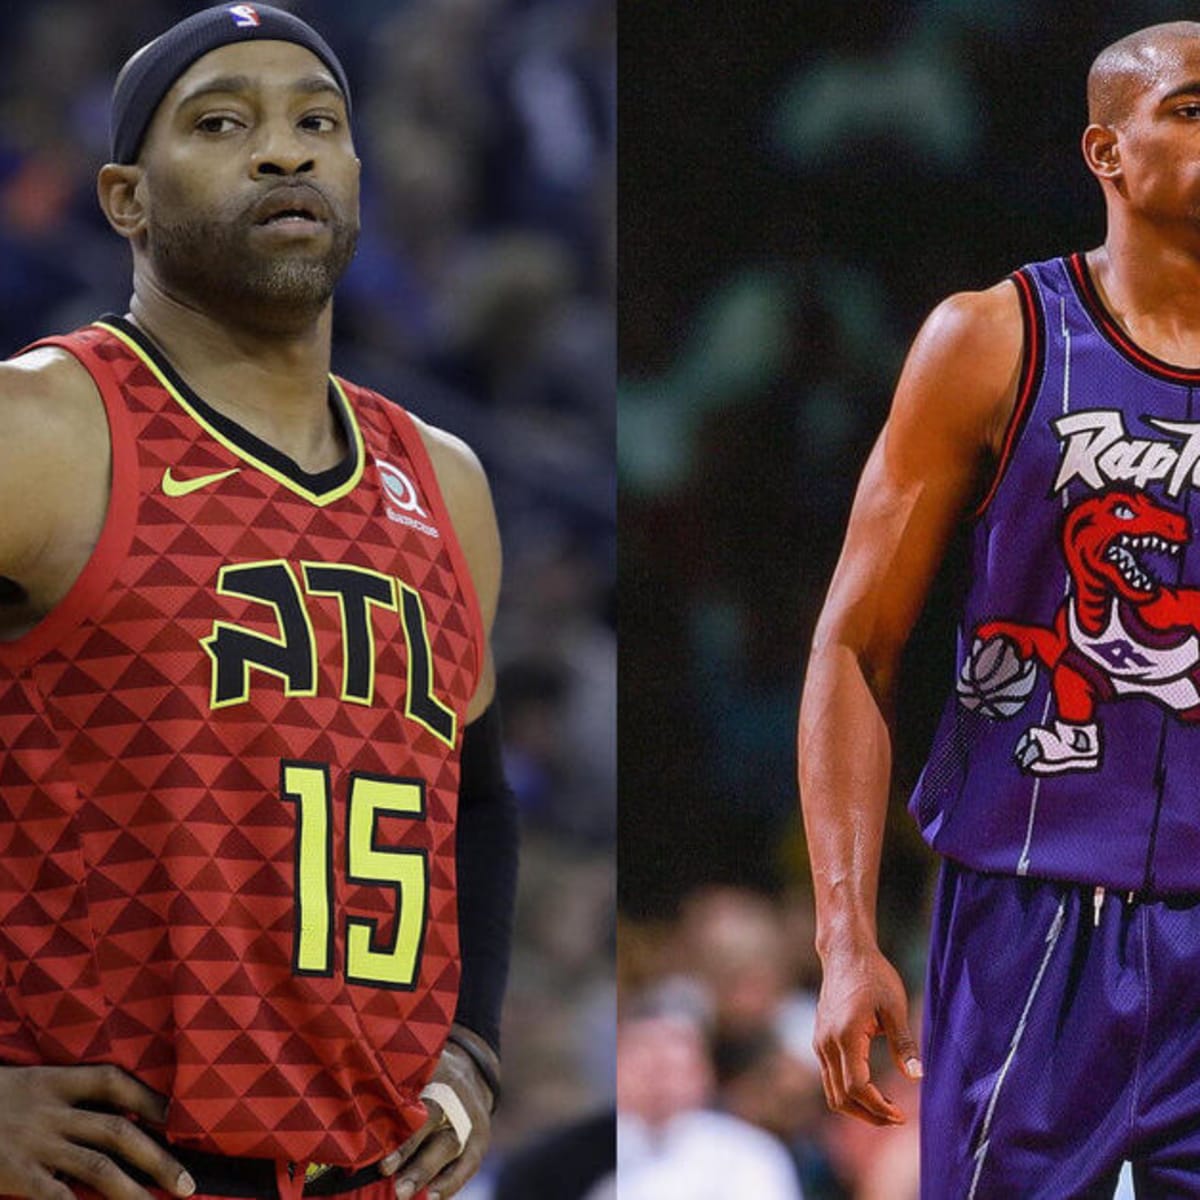 Vince Carter transitioning into his second career